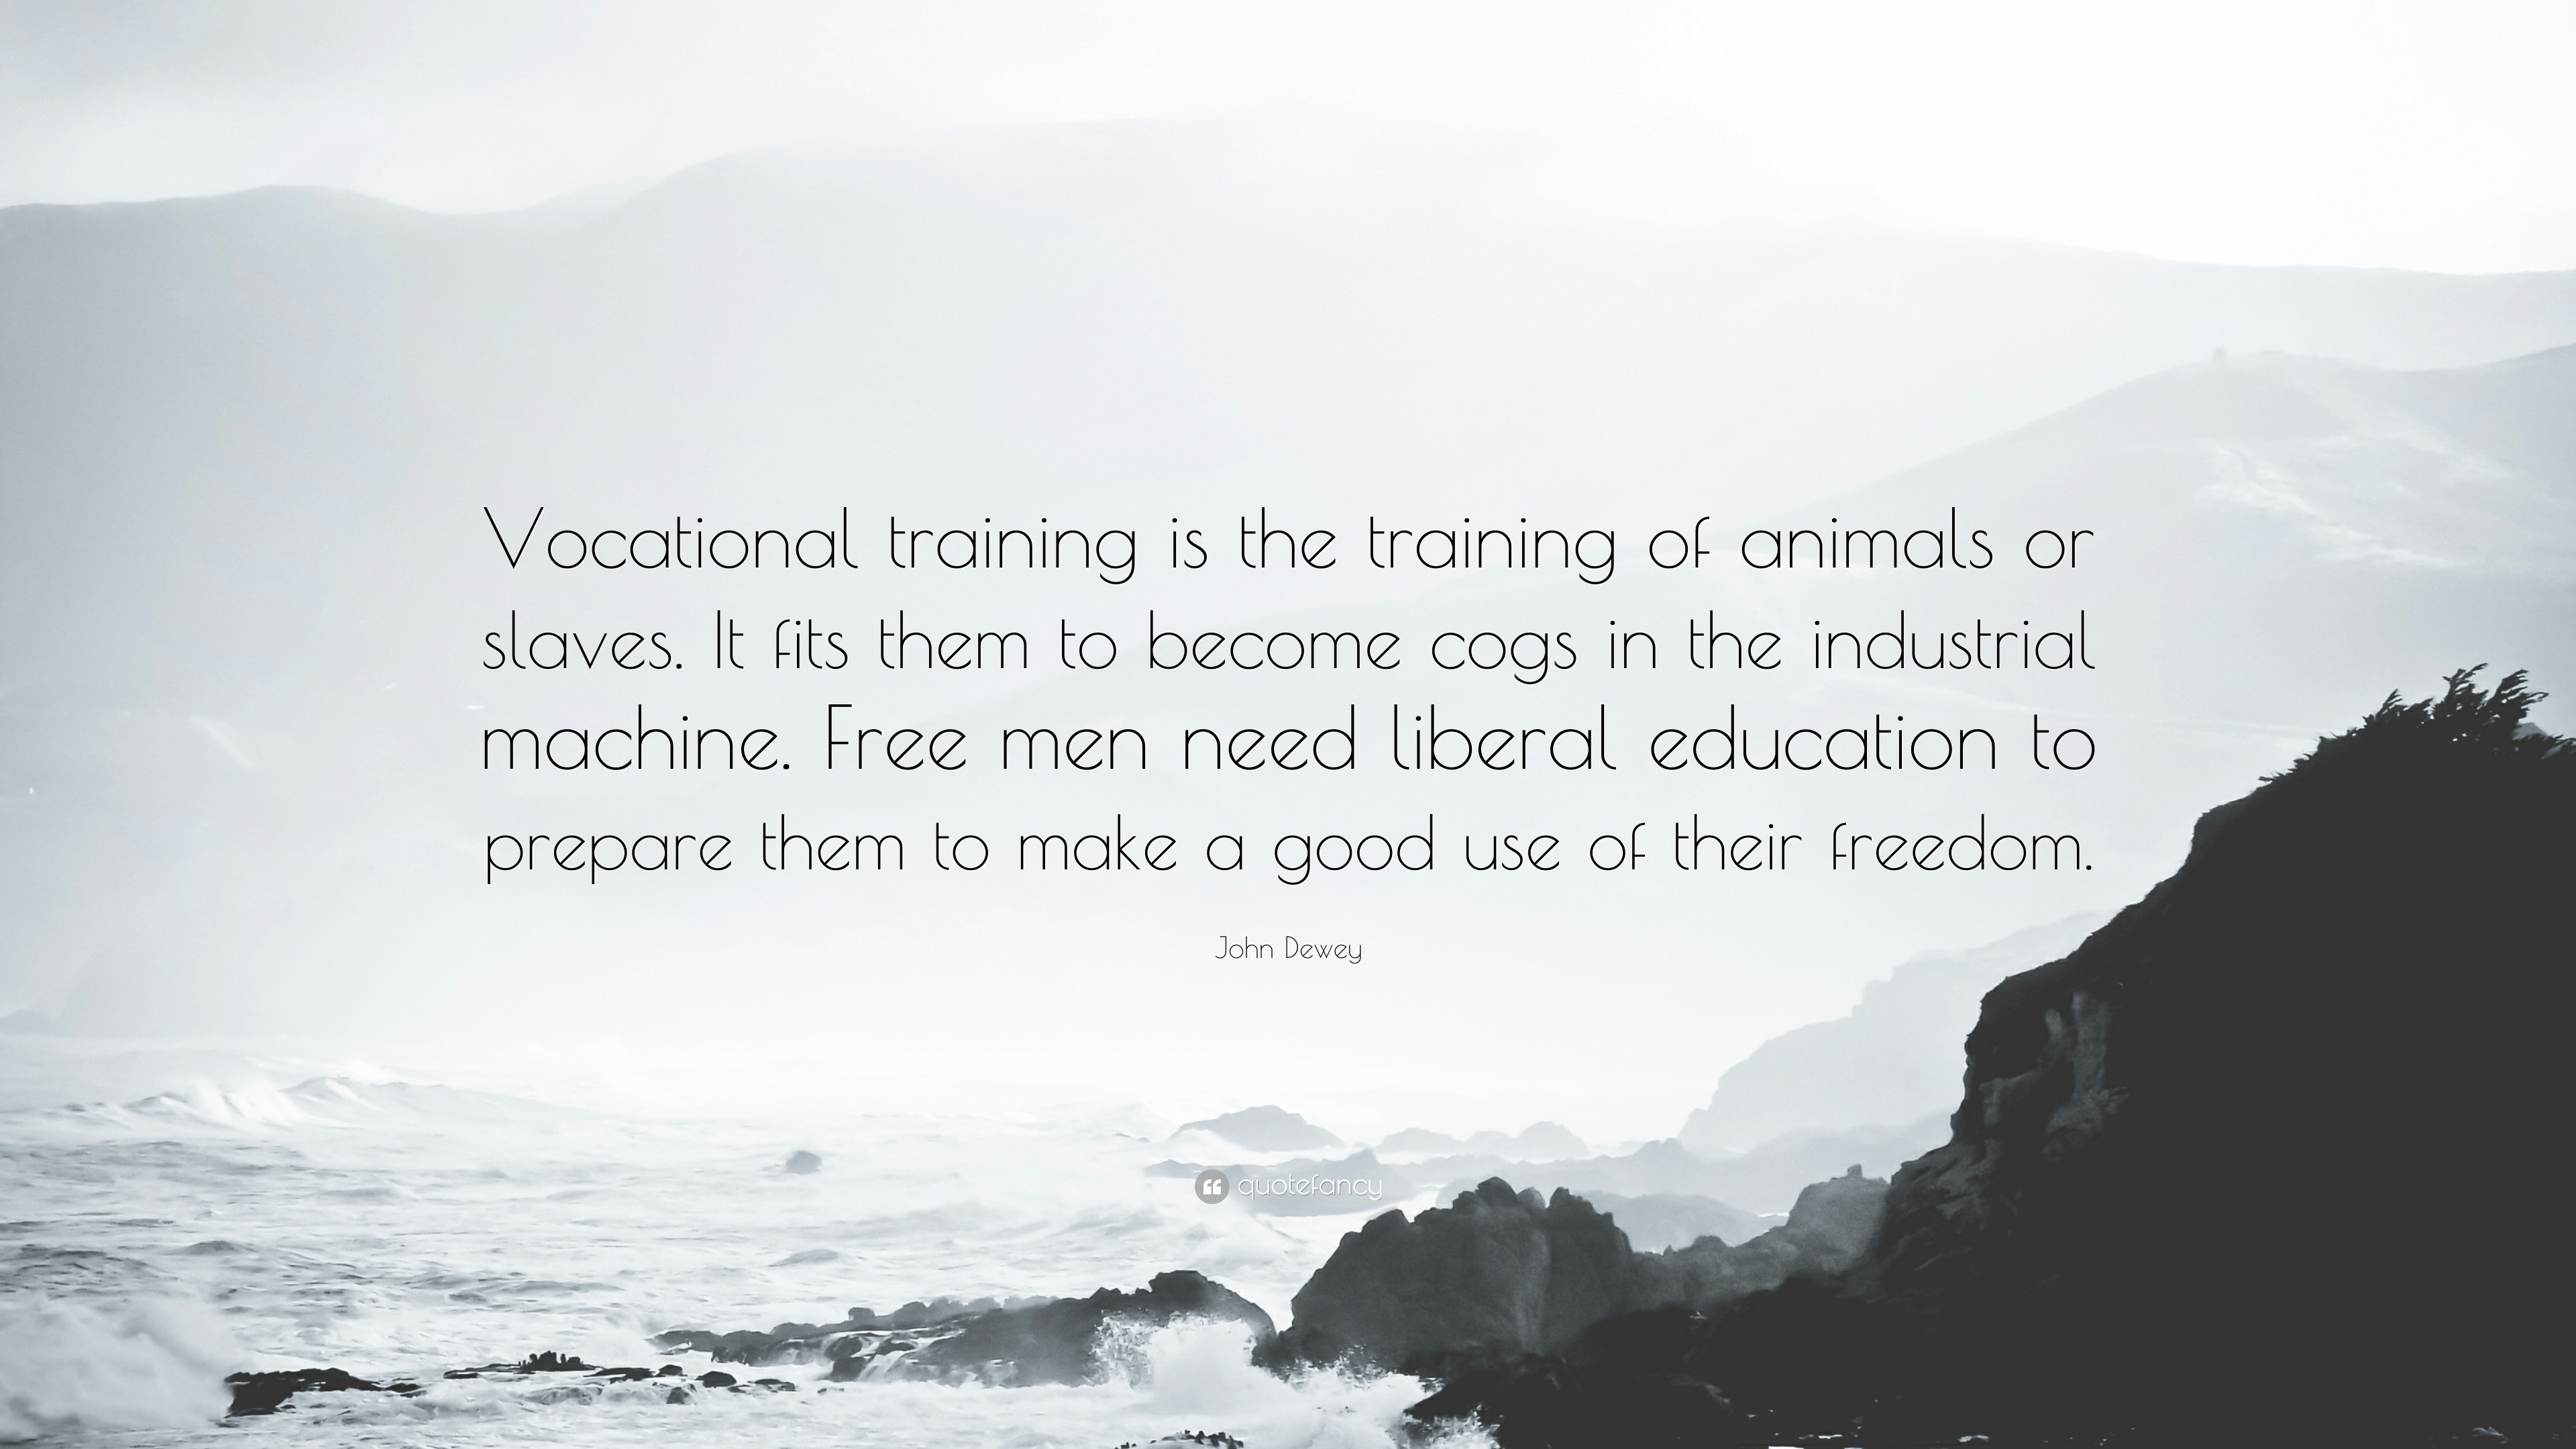 John Dewey Quote: “Vocational training is the training of animals or  slaves. It fits them to become cogs in the industrial machine. Free me...”